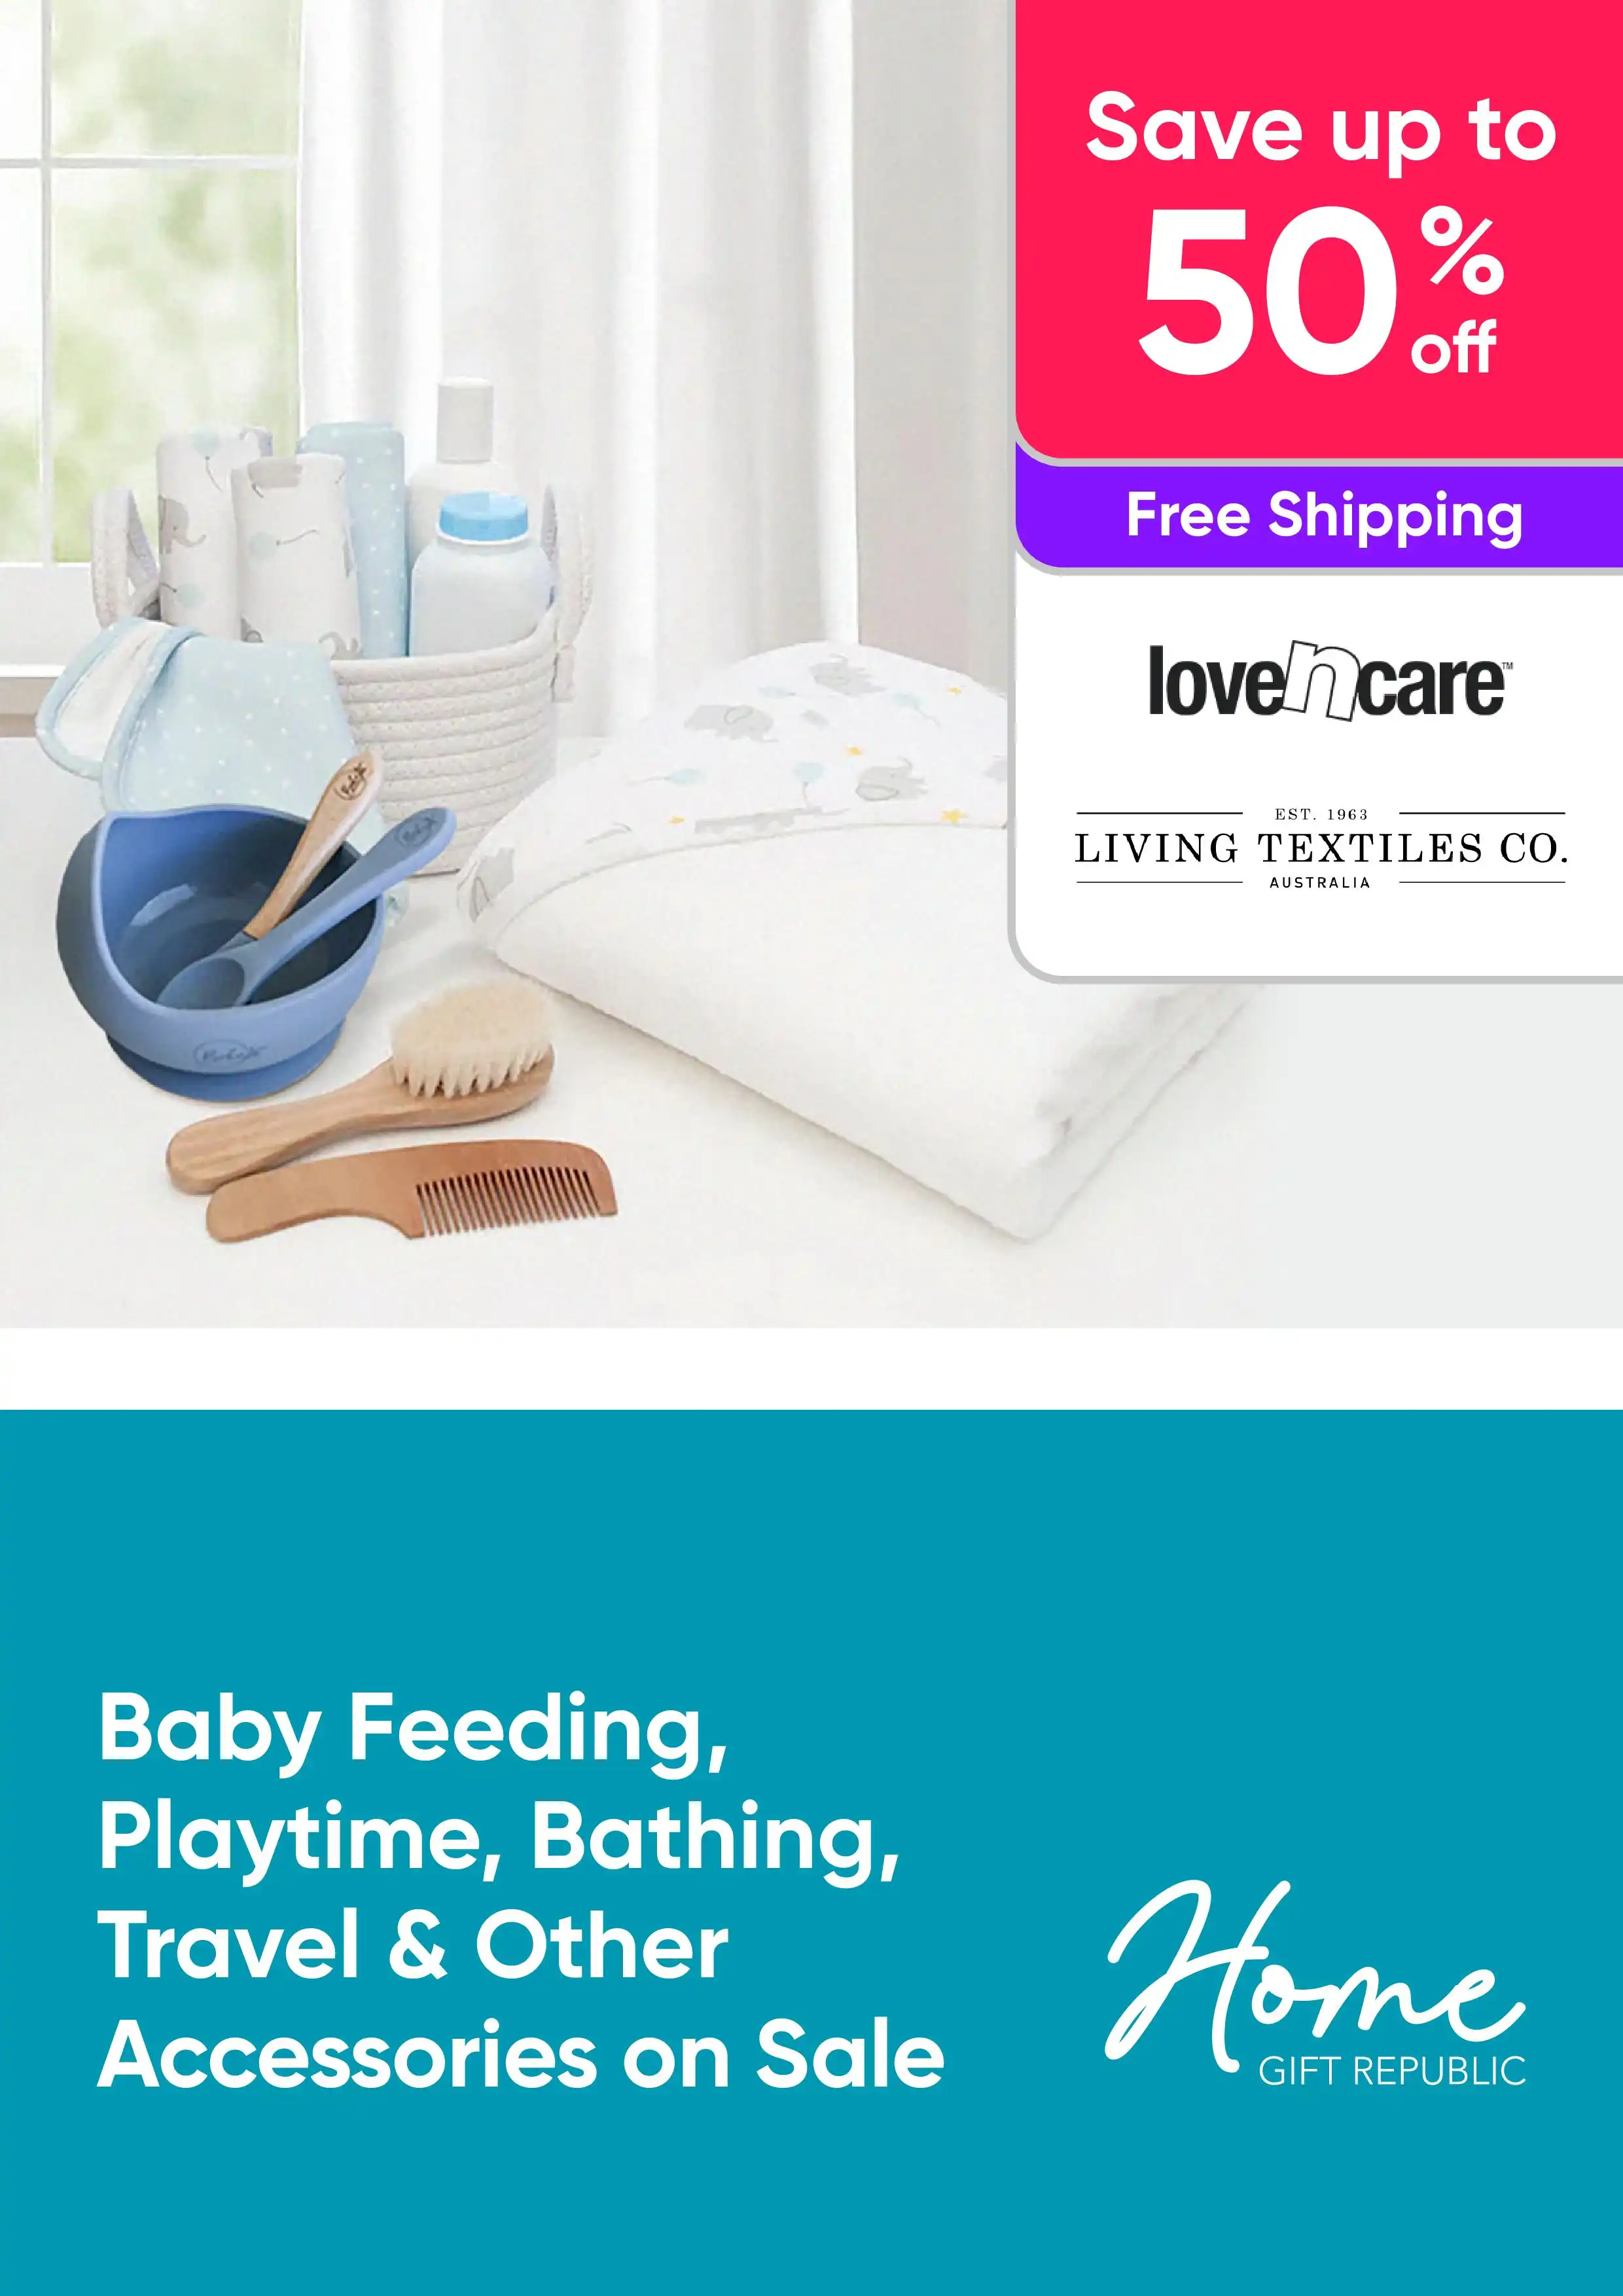 Up to 50% off Baby Feeding, Playtime, Bathing, Travel and Other Accessories